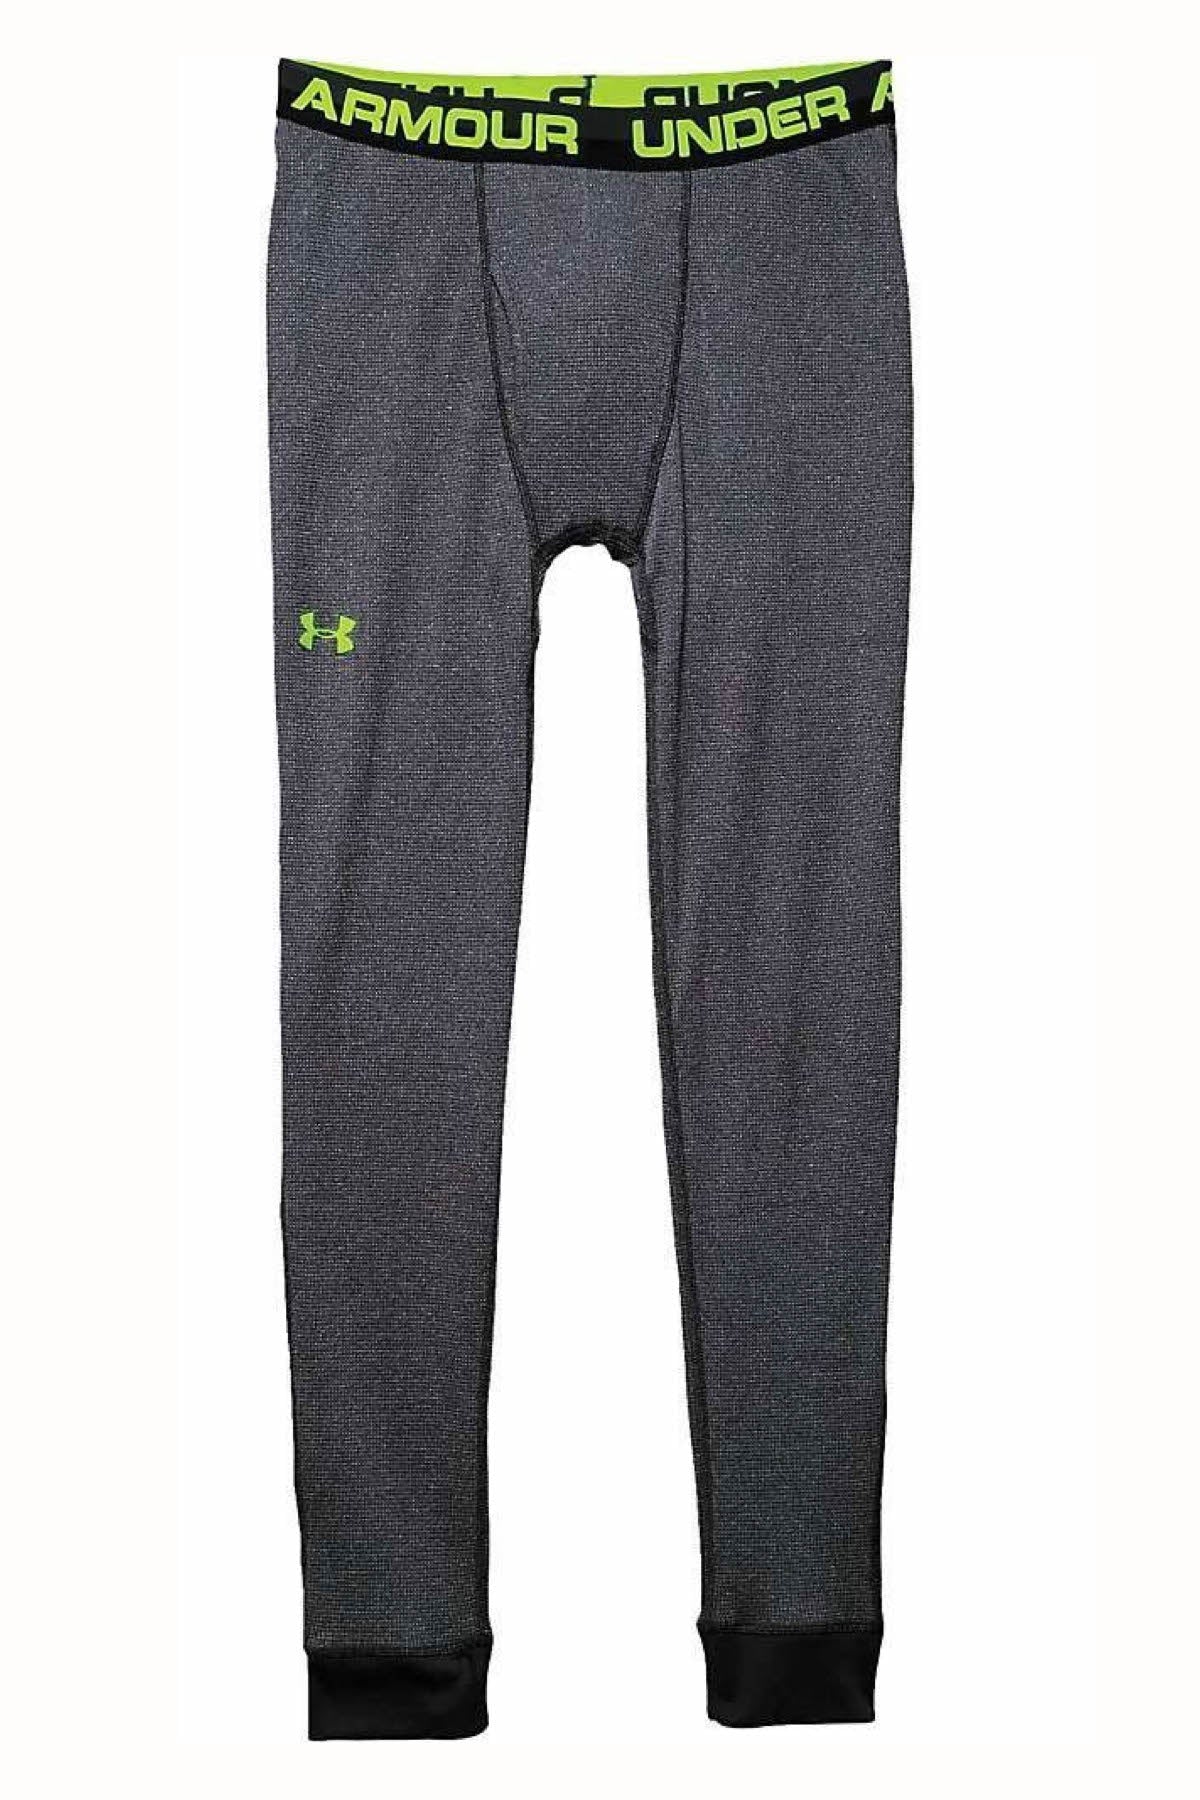 Under Armour Stealth-Grey Amplify Thermal Leggings